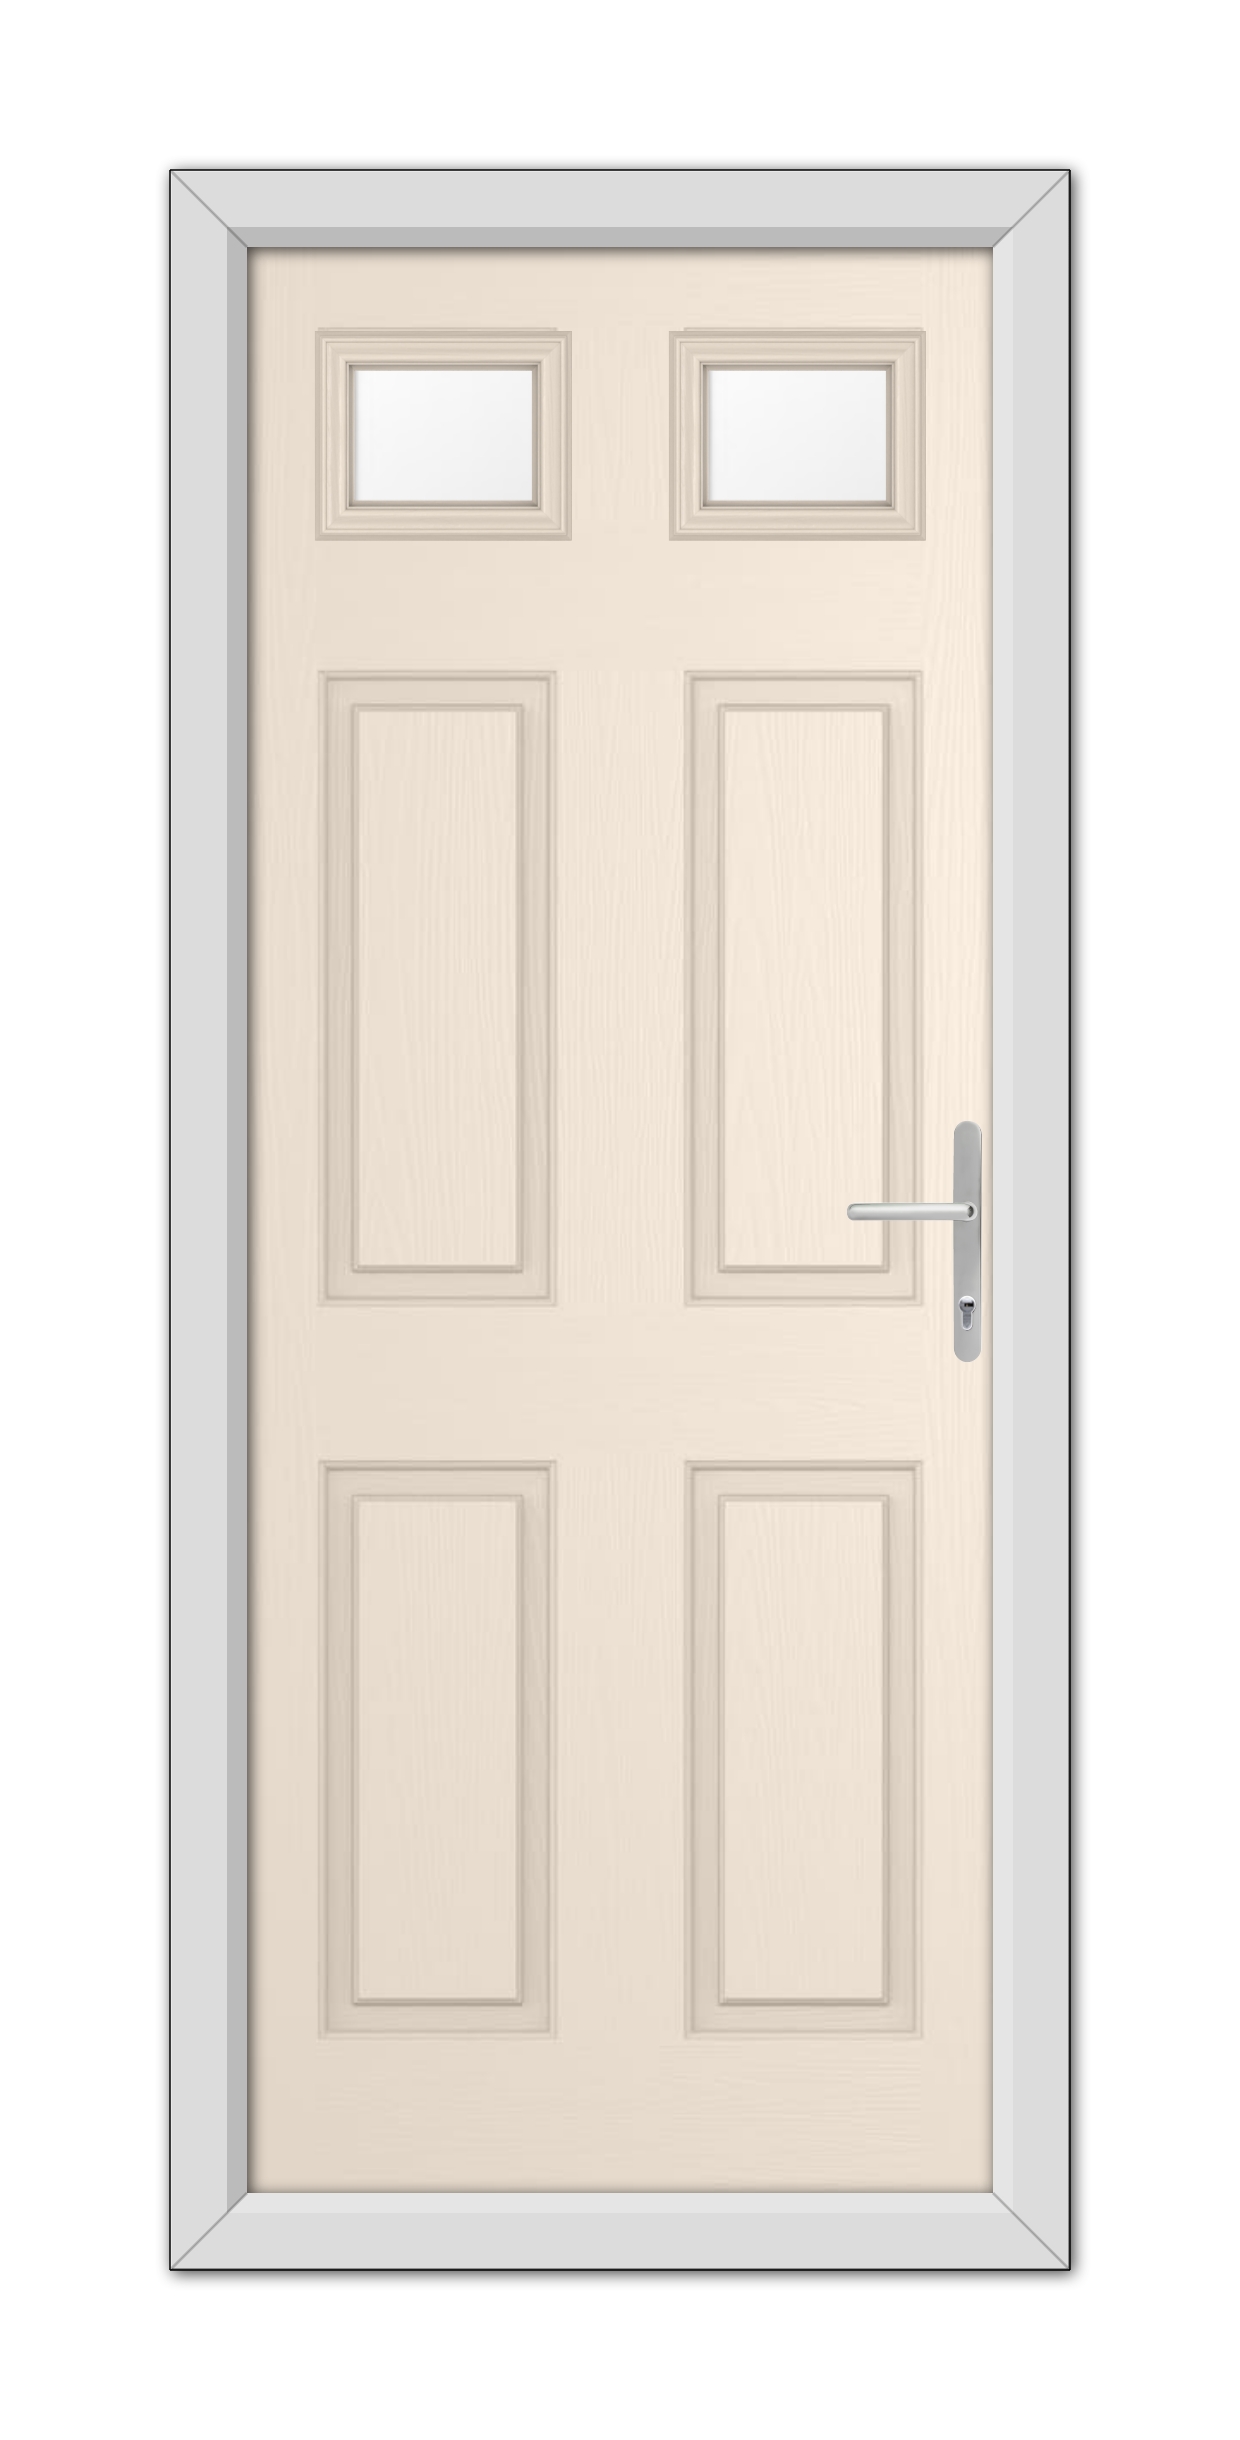 A modern Cream Middleton Glazed 2 Composite Door 48mm Timber Core with six panels and a metallic handle, set within a grey frame.